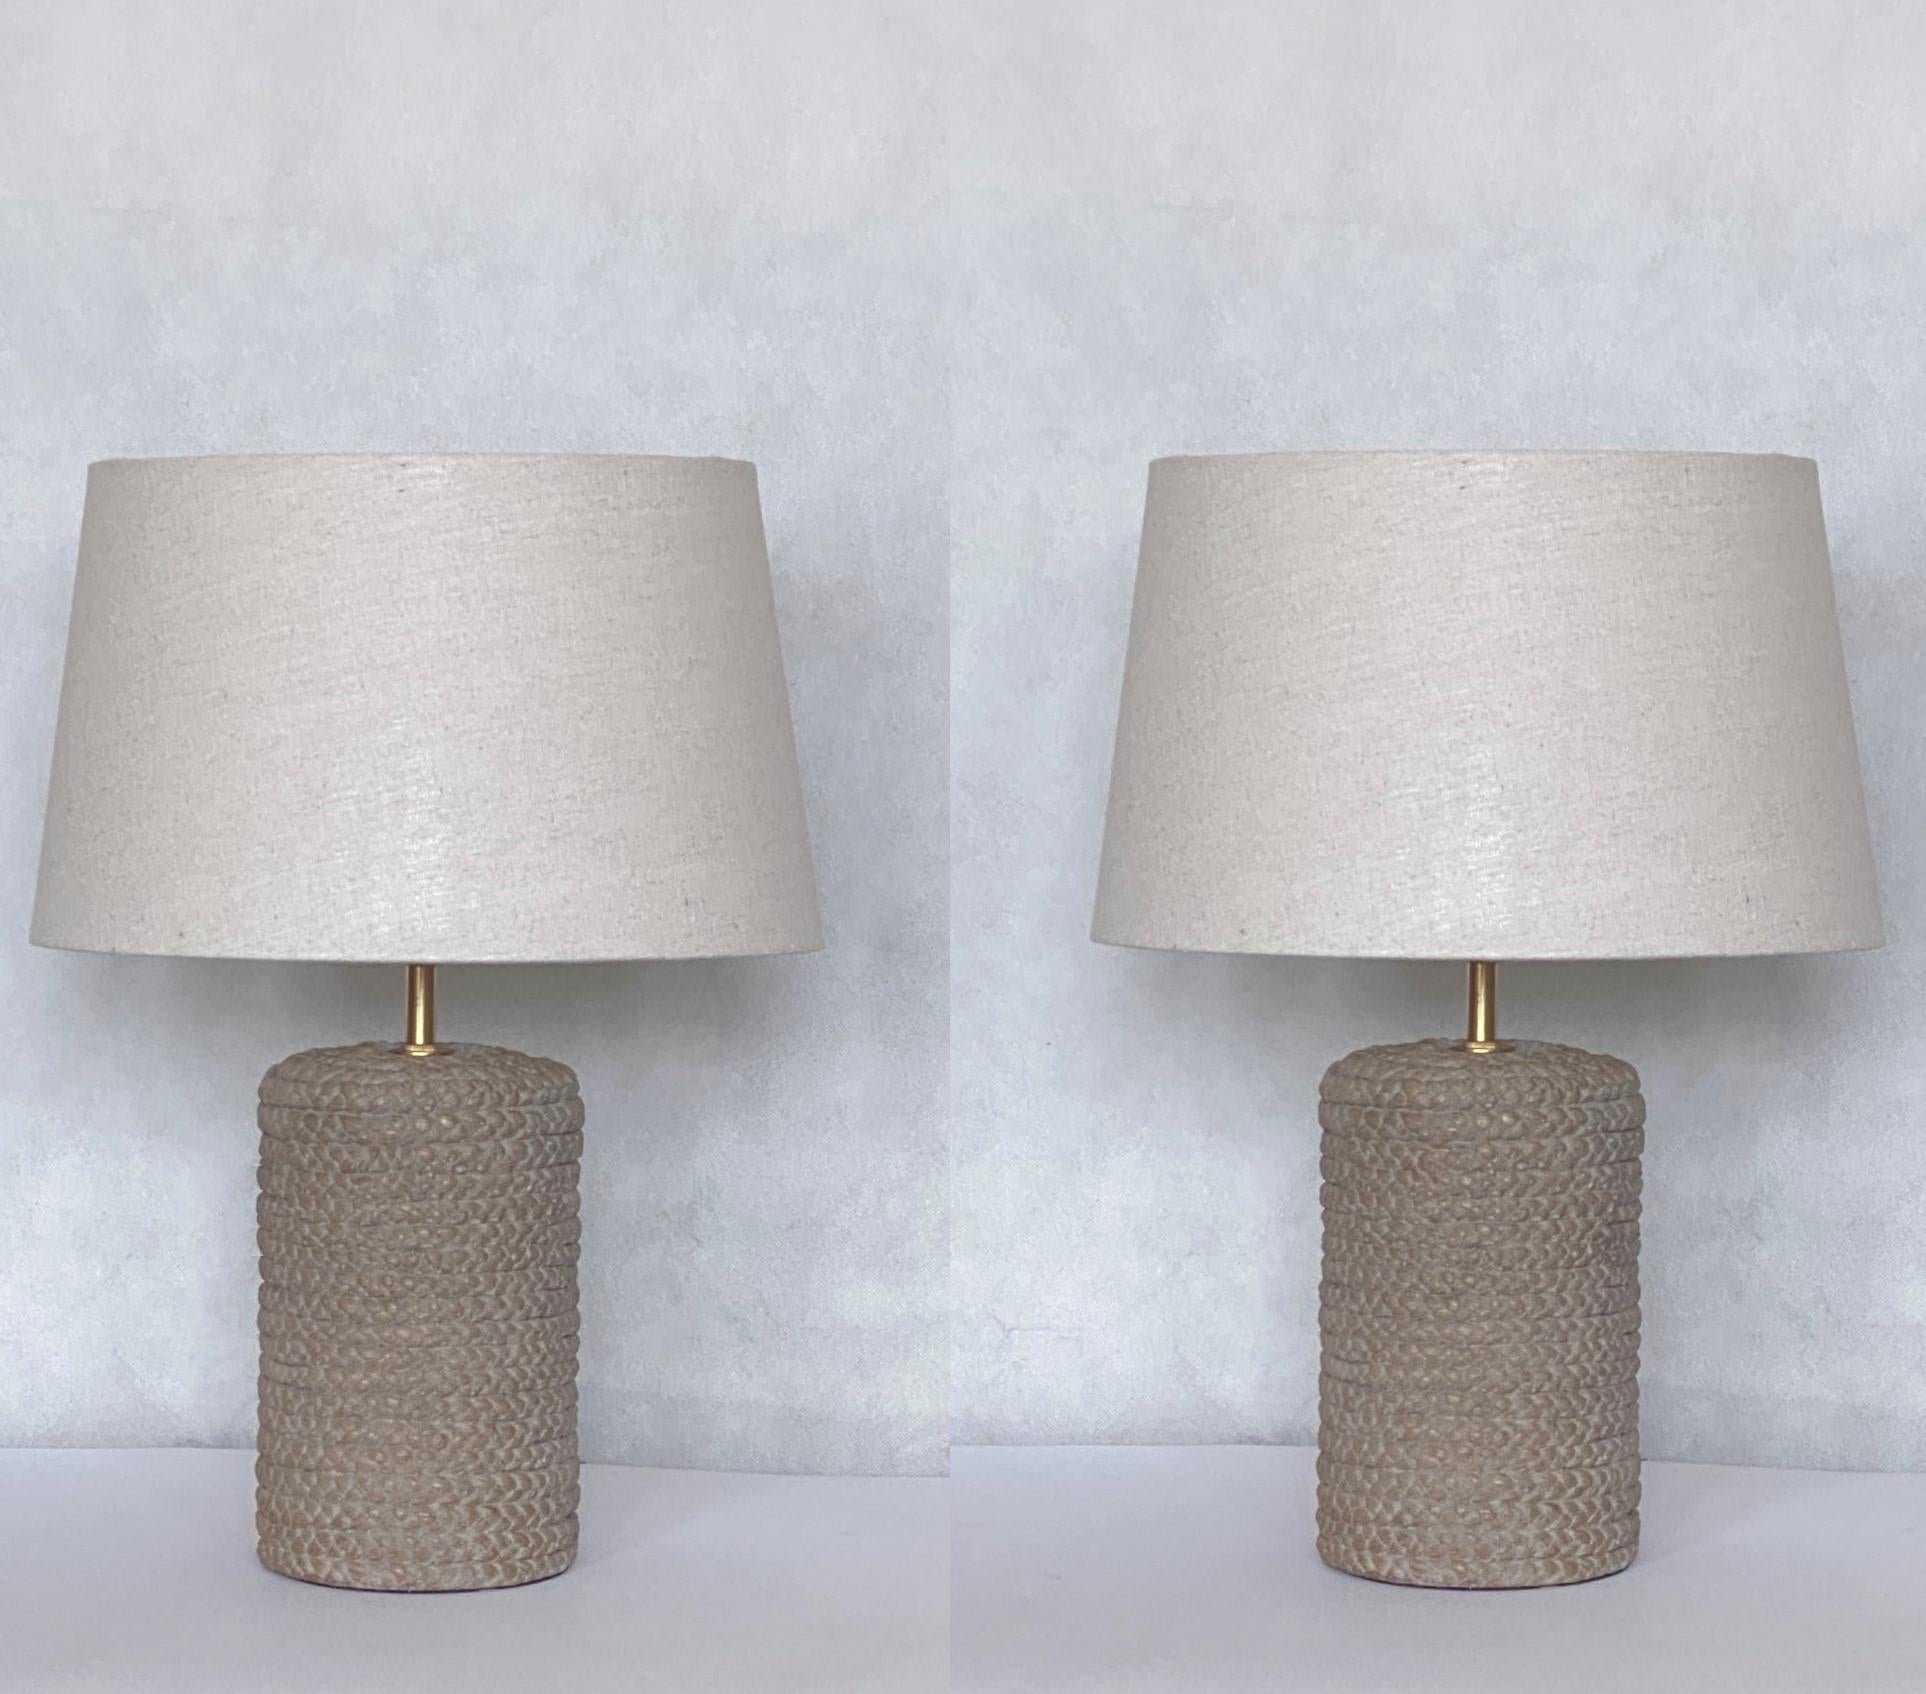 A beautiful pair of 1960s Scandinavian ceramic table lamps. Ceramic body in rope shape, with round linen shades. Both lamps in excelent condition, no damages, rewired, new shades. It takes one E27 large sized screw bulb up to 60W.
Measures: Height